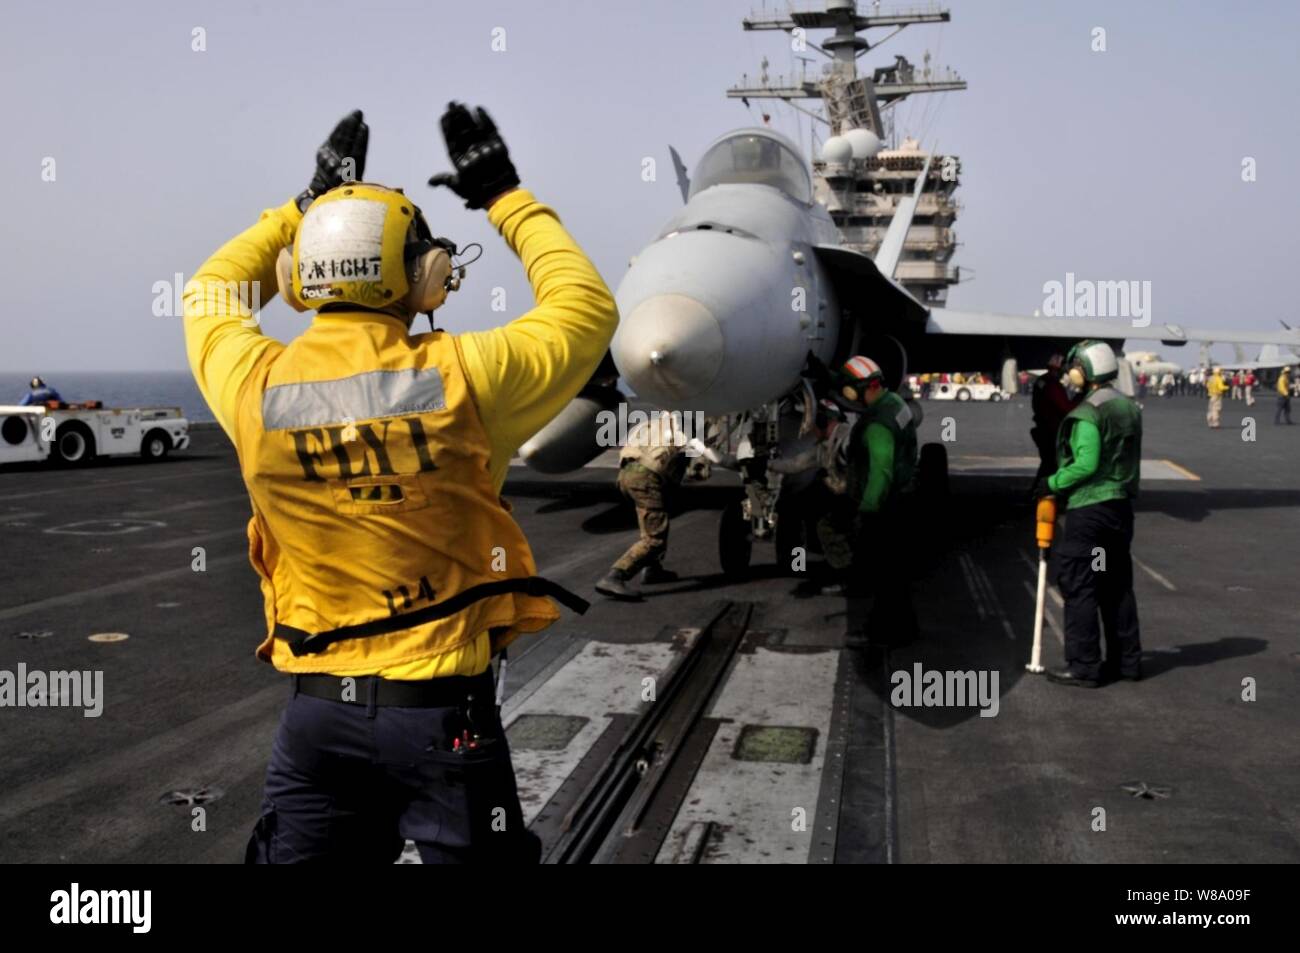 Petty Officer 3rd Class Patrick Wight signals to the pilots of an F/A-18 aircraft before launching off the flight deck of the aircraft carrier USS Ronald Reagan (CVN 76) in the Arabian Sea on June 6, 2011.  The Ronald Reagan and Carrier Air Wing 14 are deployed to the U.S. 5th Fleet area of responsibility conducting close-air support missions as part of Operation Enduring Freedom. Stock Photo